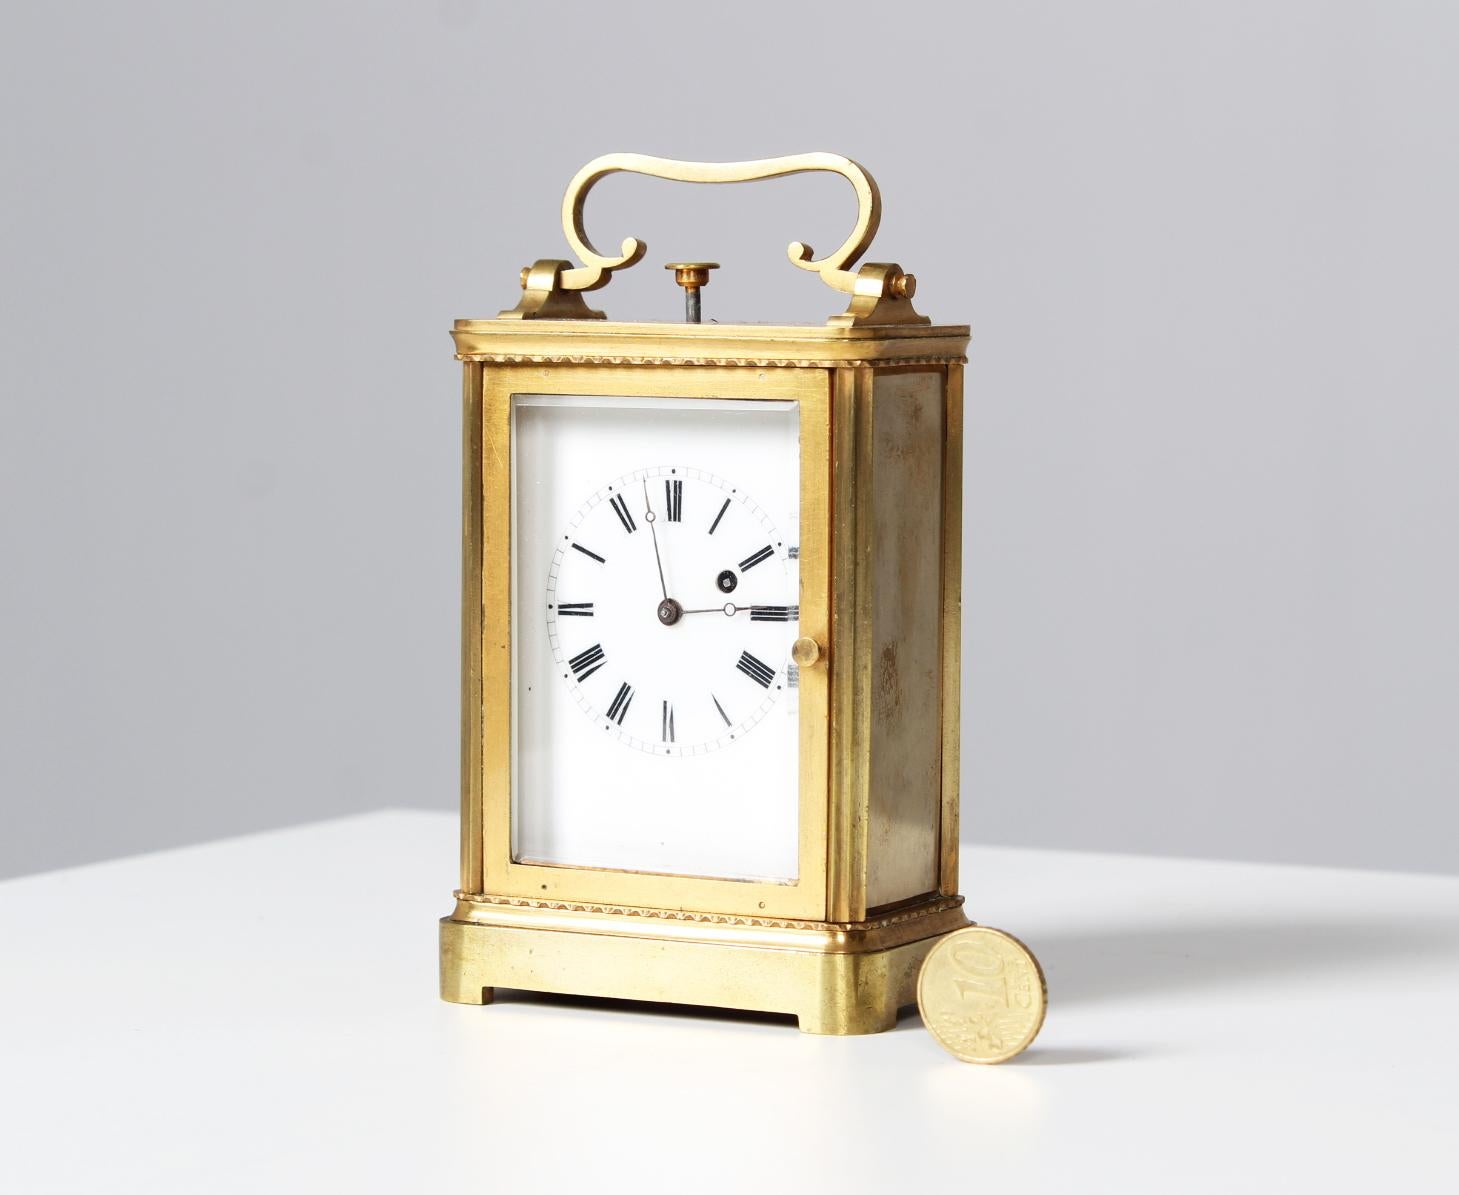 Travel clock with repetition

France
Brass
19th century

Dimensions: H x W x D: 11 x 7,5 x 4,5 cm

Description:
Small travel clock, so-called officer's clock, carriage clock or pendulette de voyage.

Front glazed brass case. Dial with